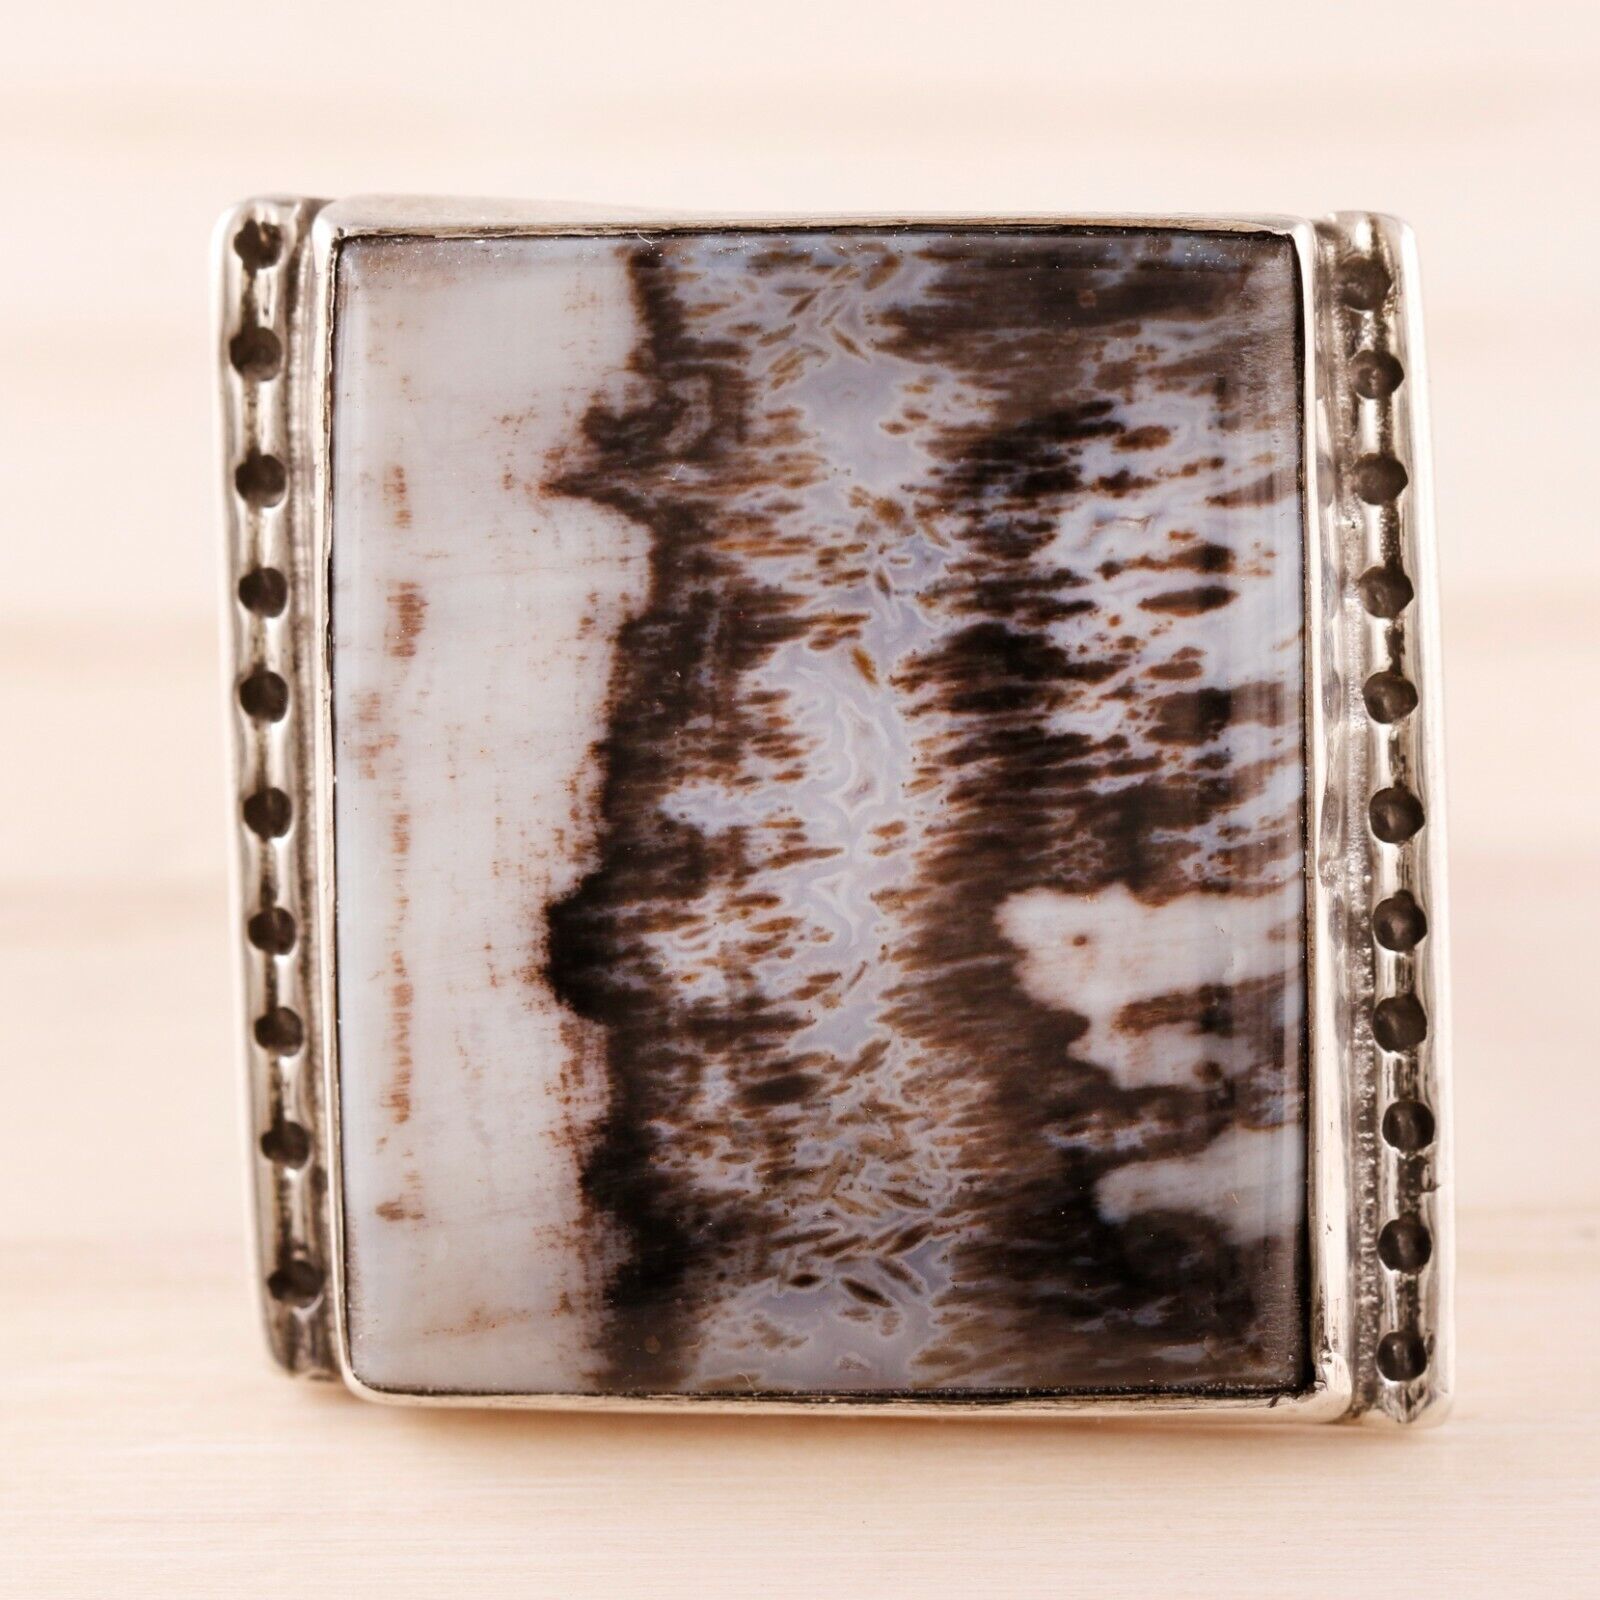 LARGE OLD PAWN STERLING SILVER PETRIFIED WOOD SQUARE RING SIZE 7.75